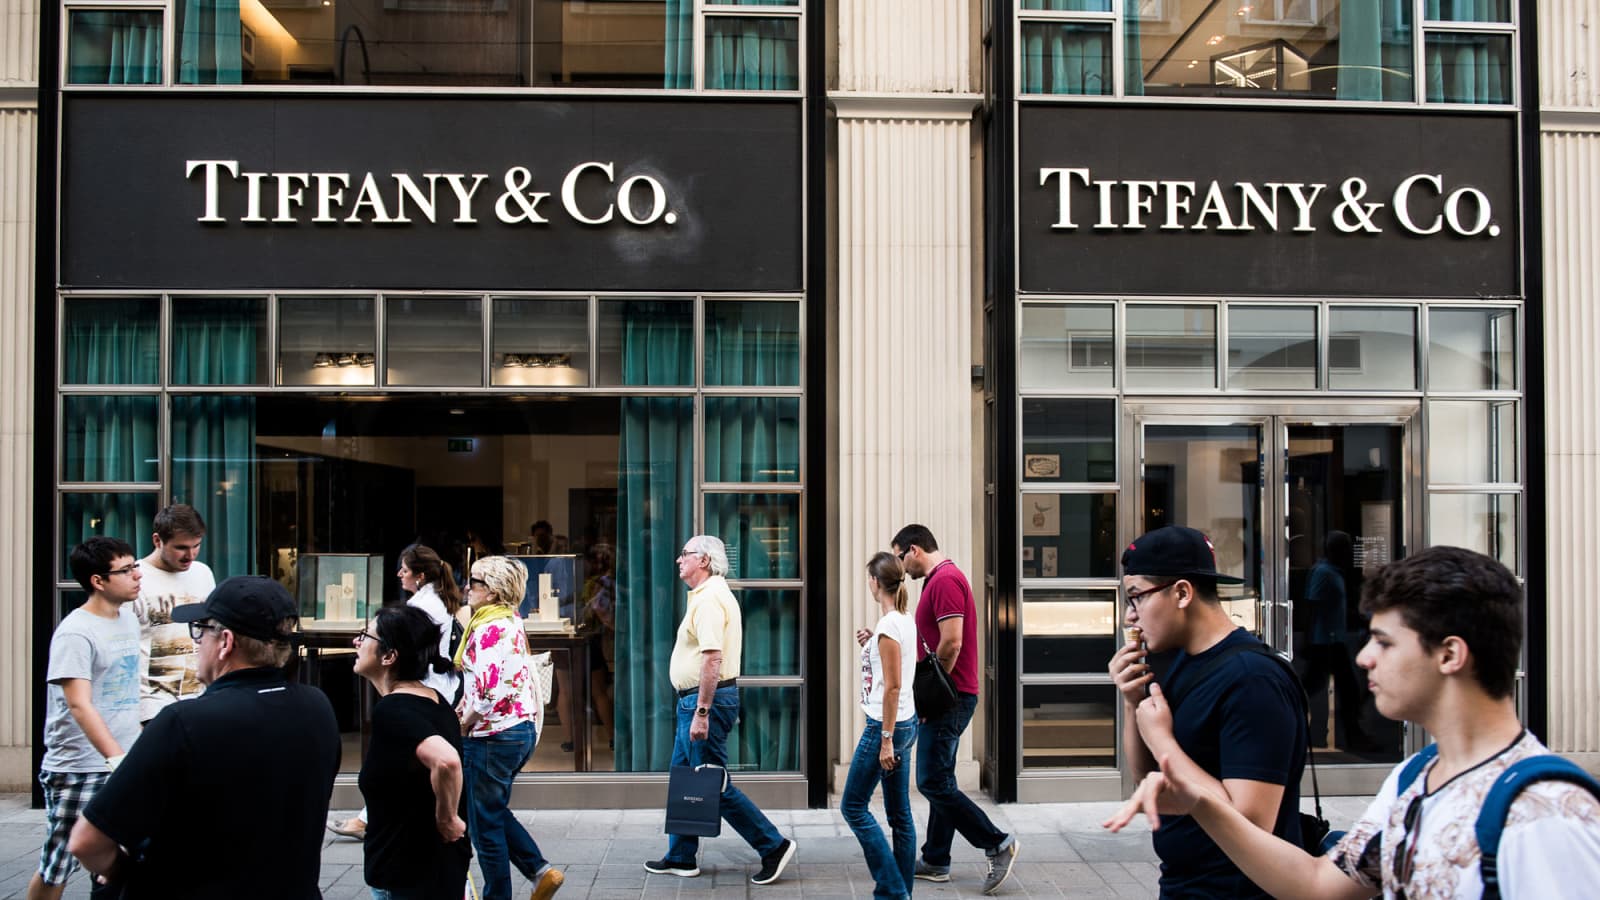 Louis Vuitton parent company to acquire Tiffany & Co. stores, including  North Austin location